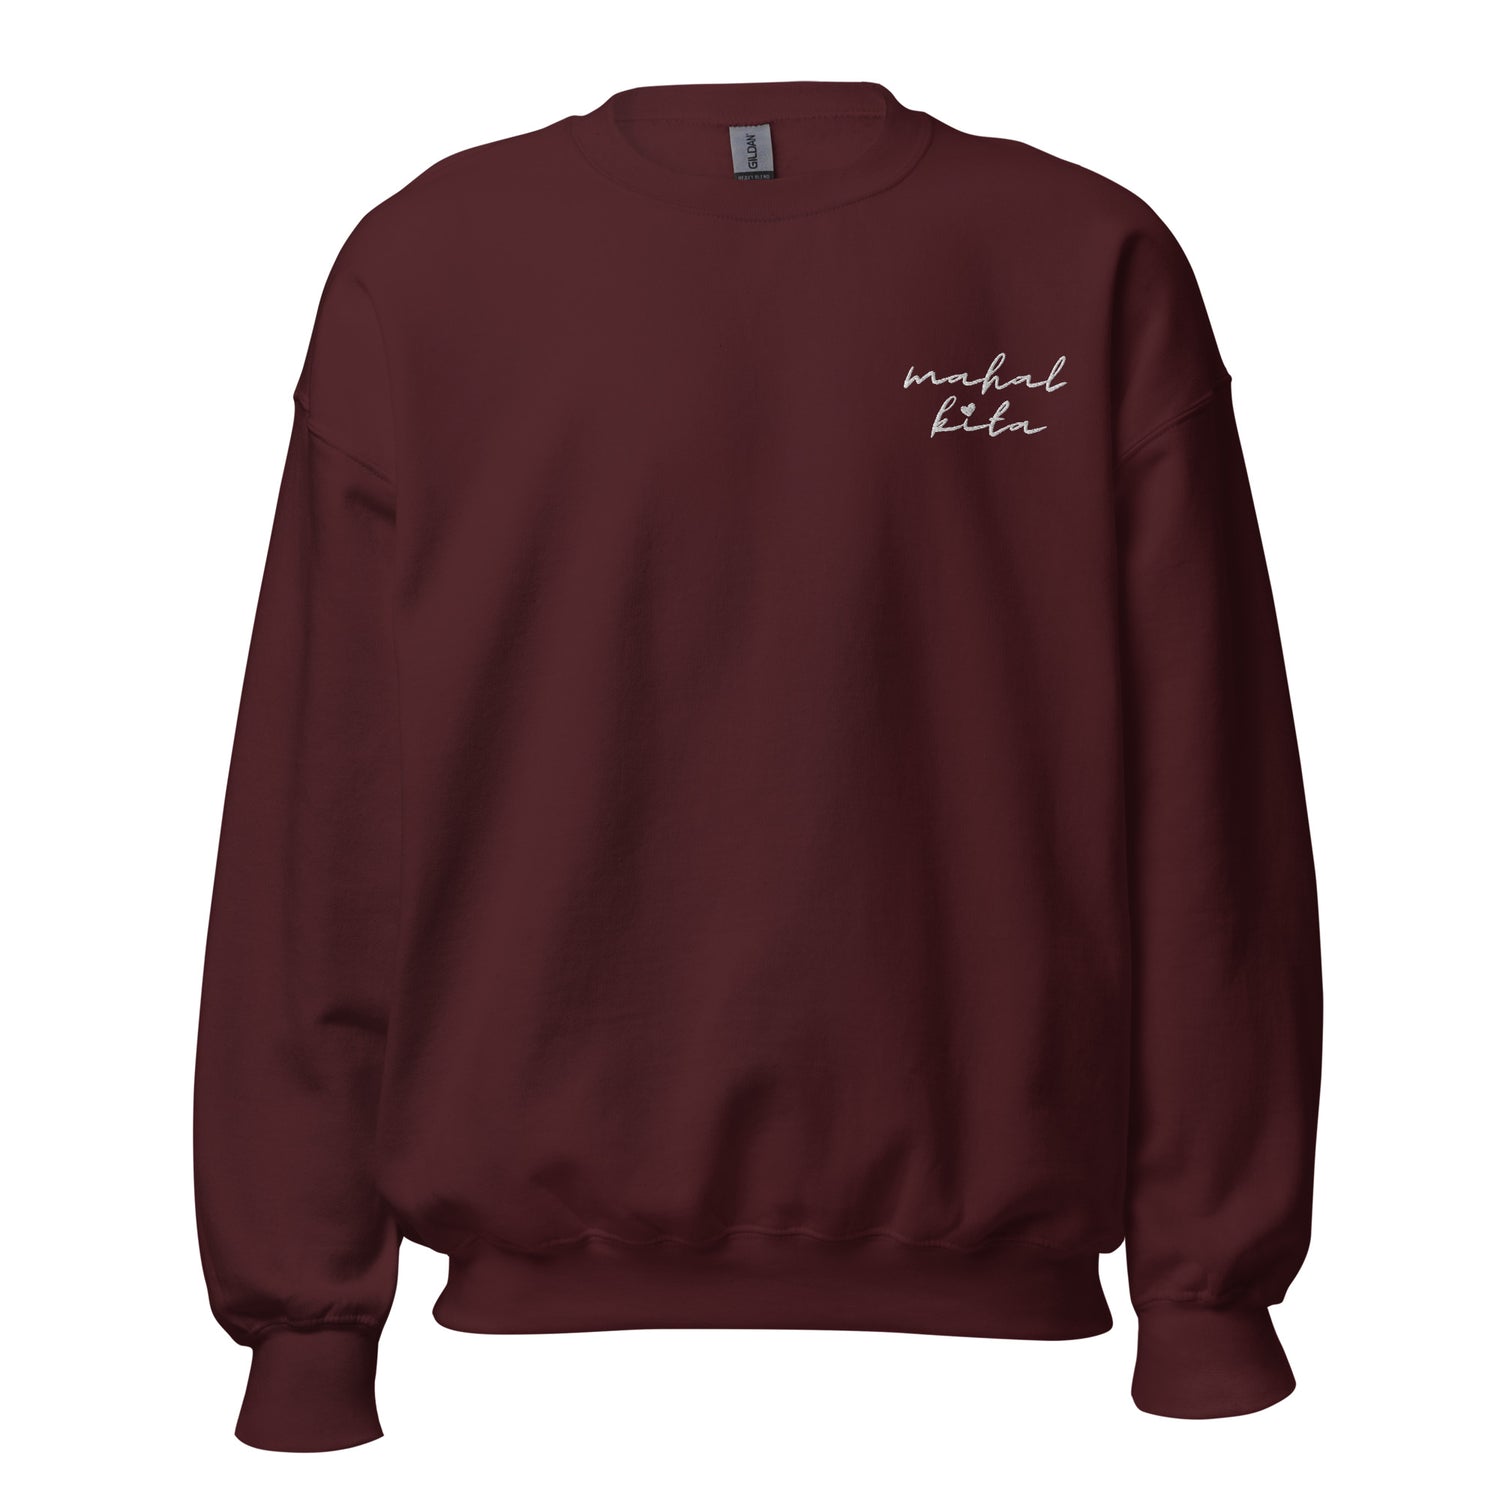 Filipino Sweatshirt Crew Neck Mahal Kita Love You Embroidered Valentine's Day Merch in color variant Maroon